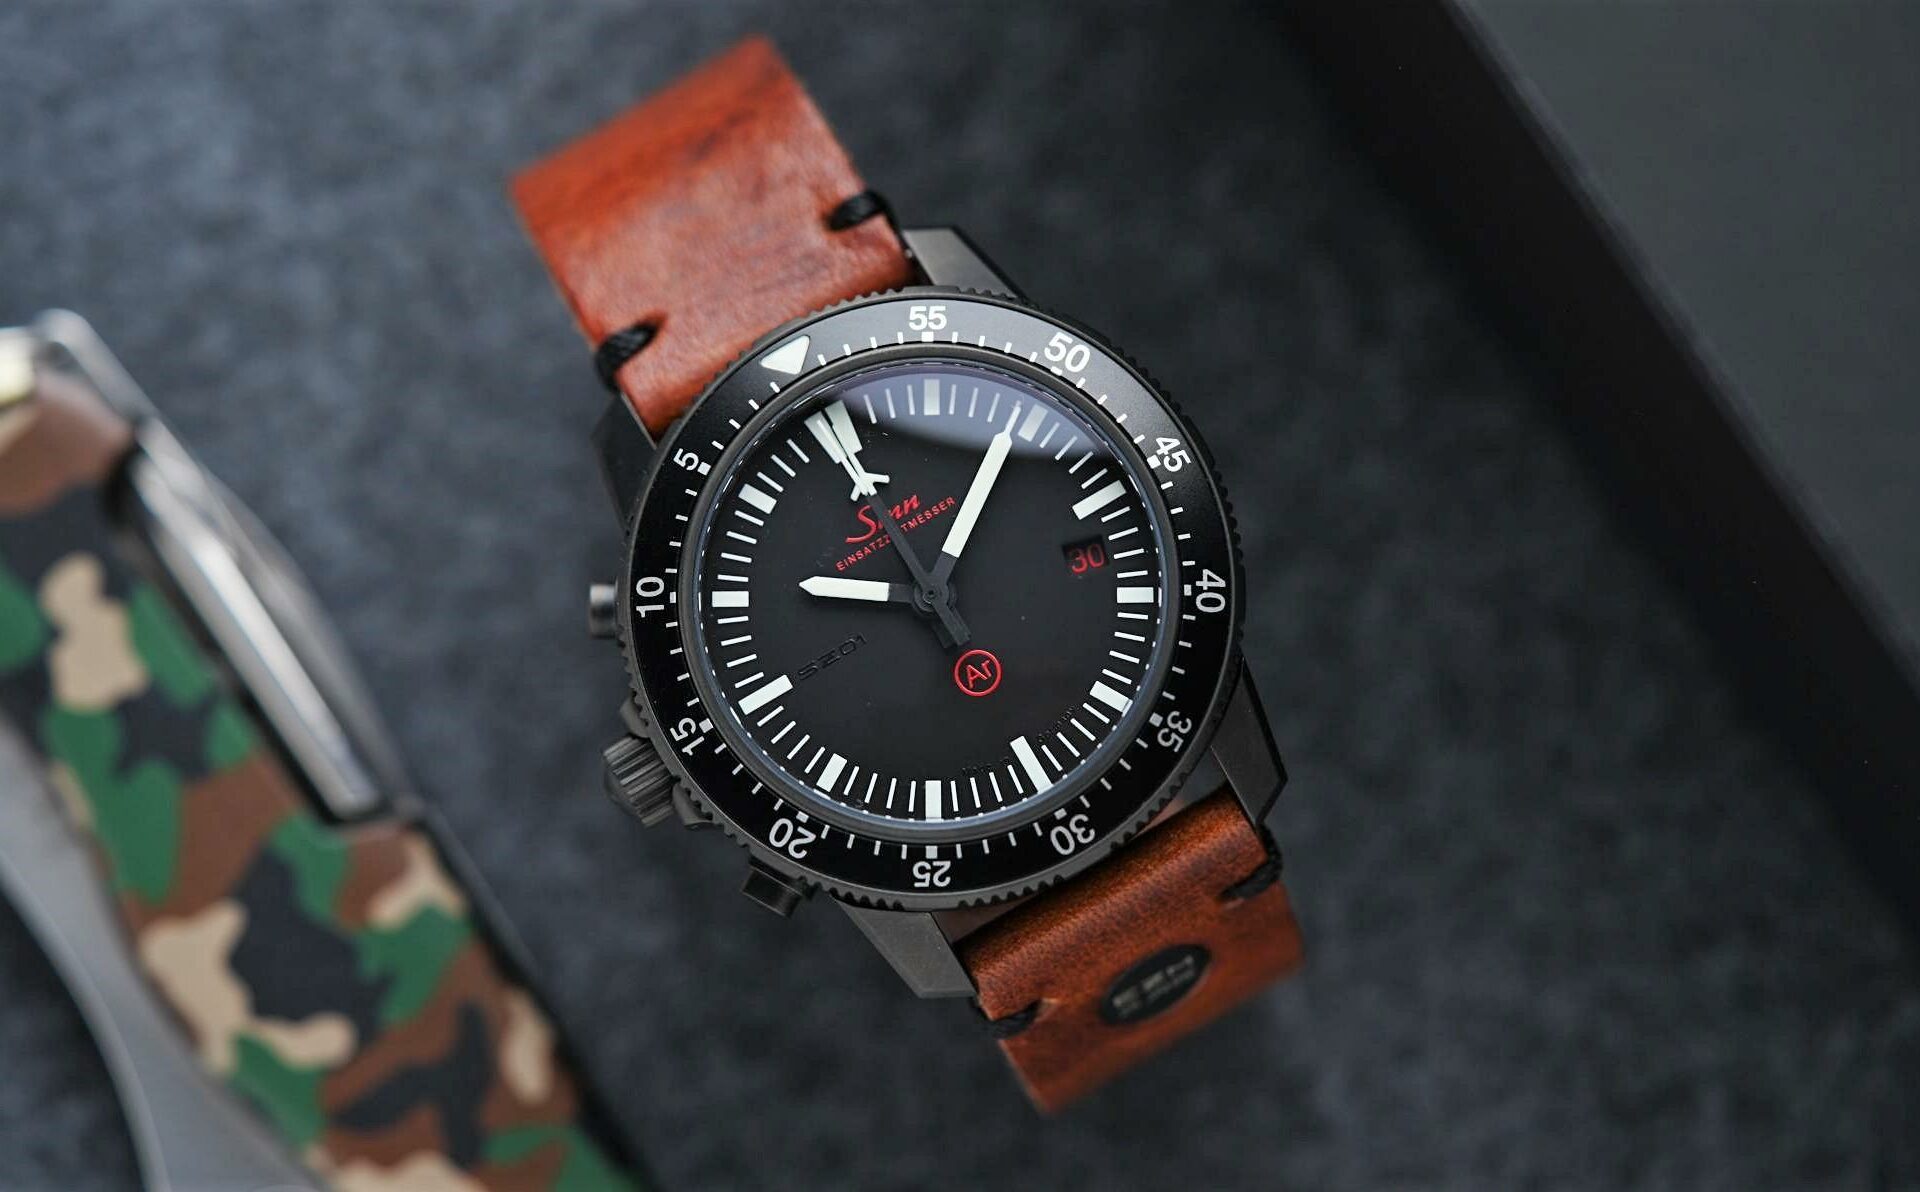 Sinn EZM 1.1S Limited Edition 500 with army knife in background closeup shot.